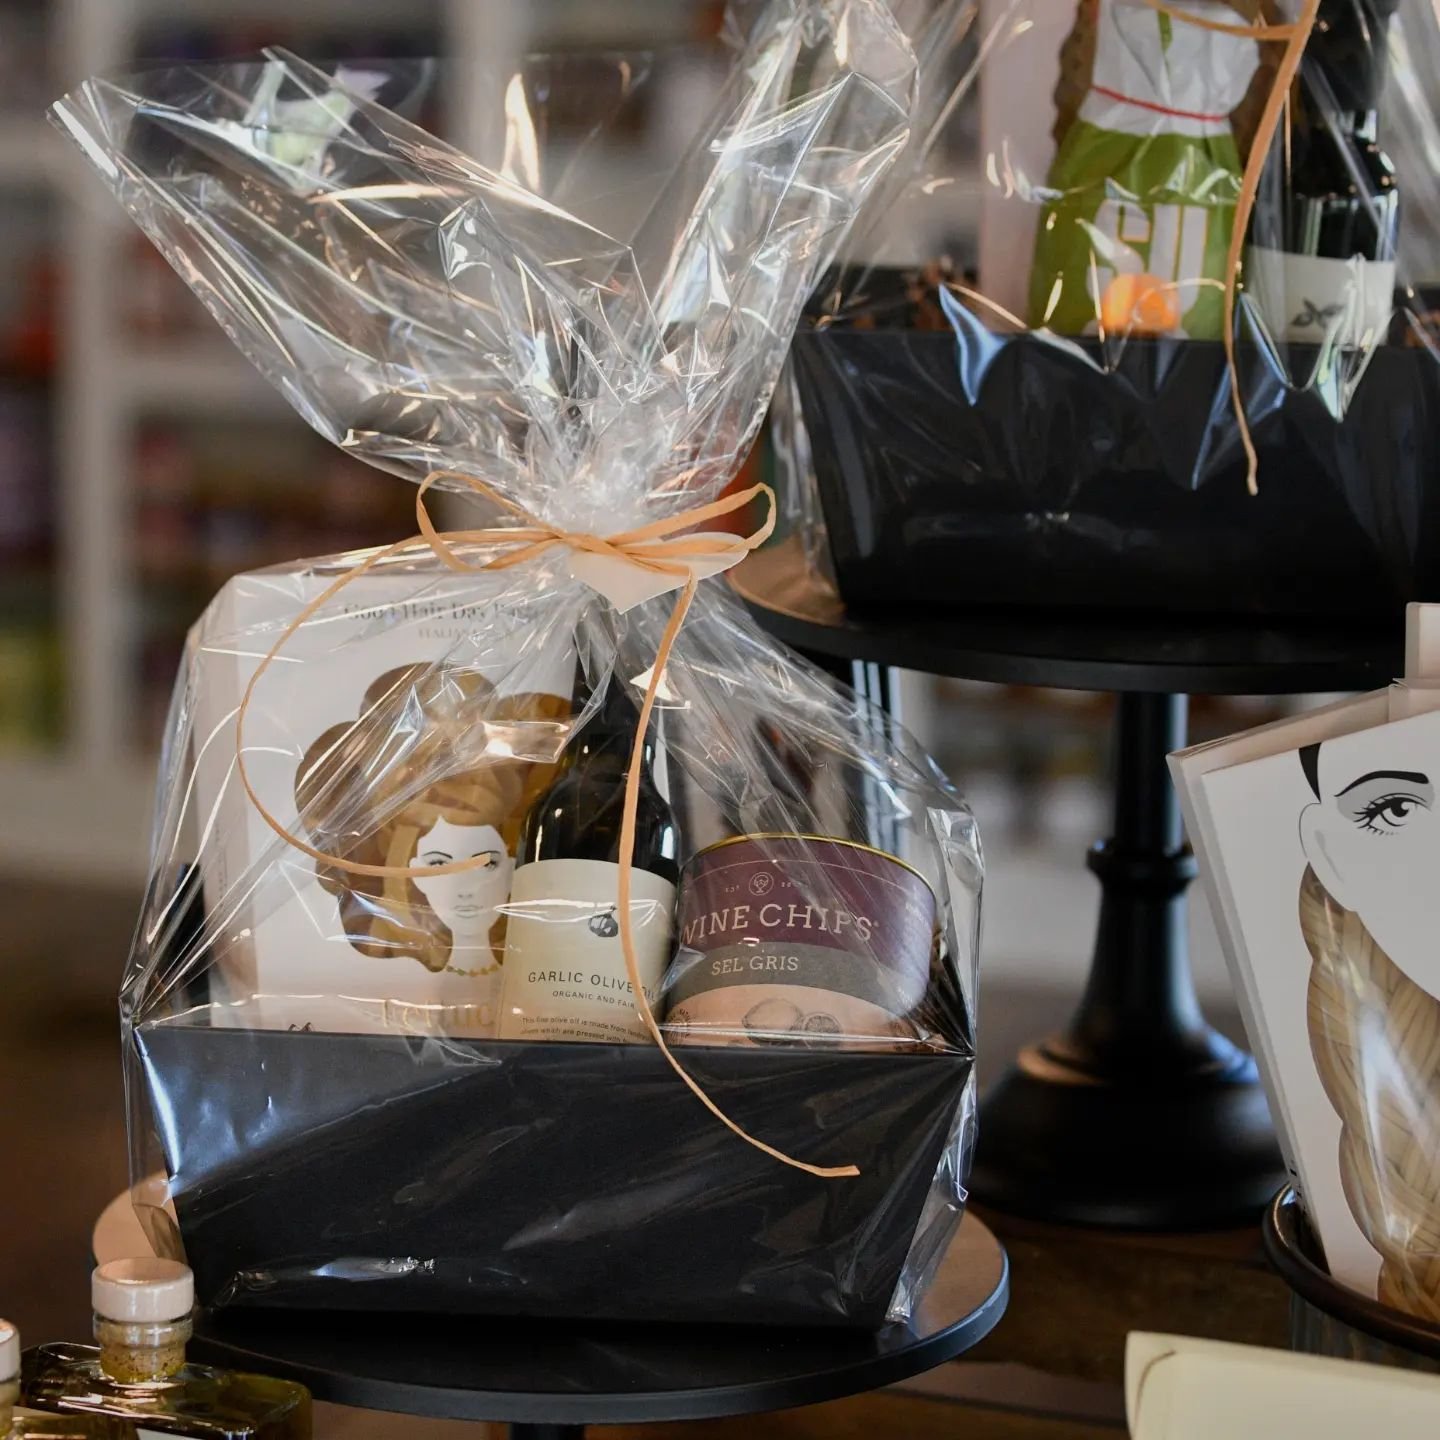 Mother's Day is this Sunday; celebrate the Mom or Mom Figure in your life with one of our gifts! Gift baskets with curated dry goods, oils, pastas and more, flower bouquets in all sizes, and a full special menu from which you can pick out a treat or 